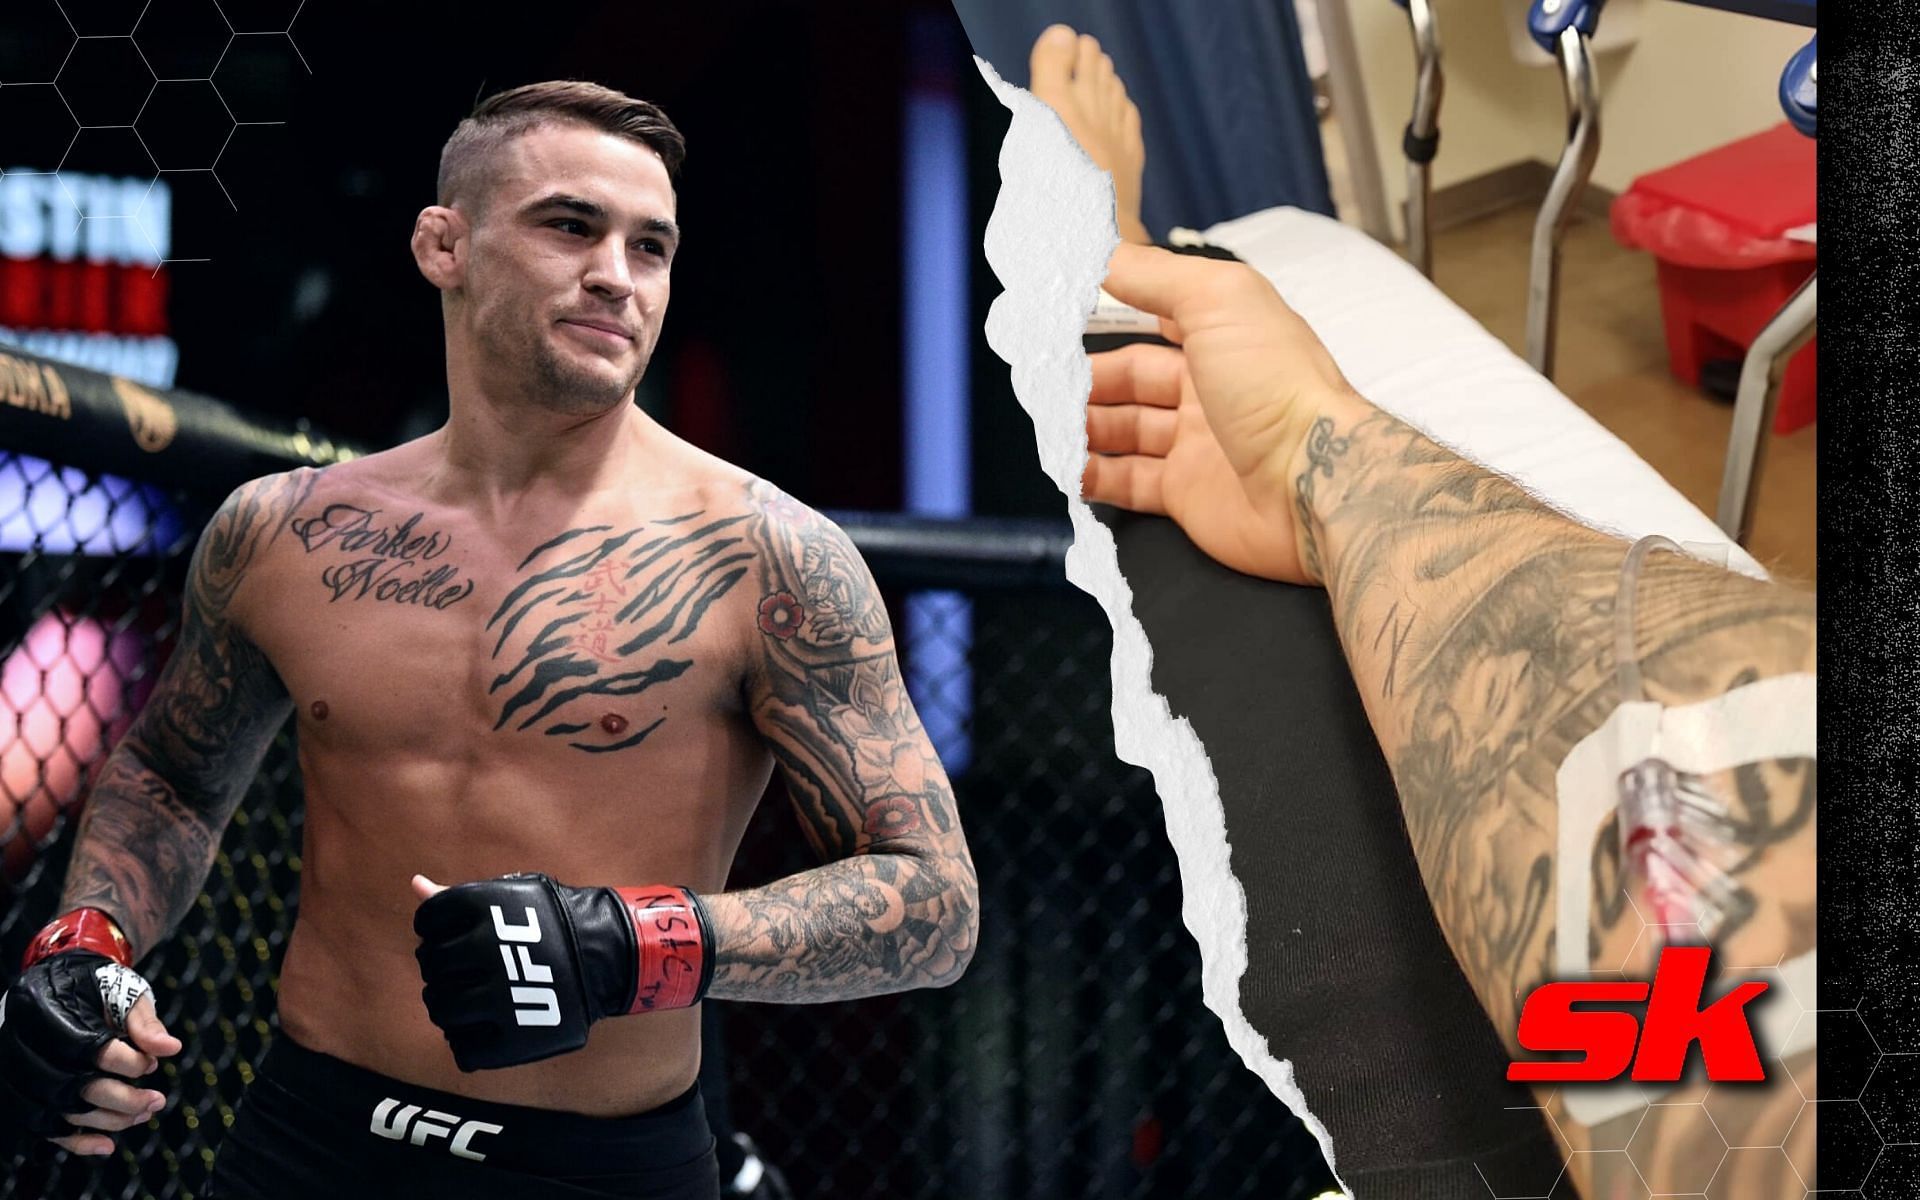 UFC lightweight Dustin Poirier hospitalized due to staph infection. [Image credits: @dustinpoirier on Instagram; Getty Images]